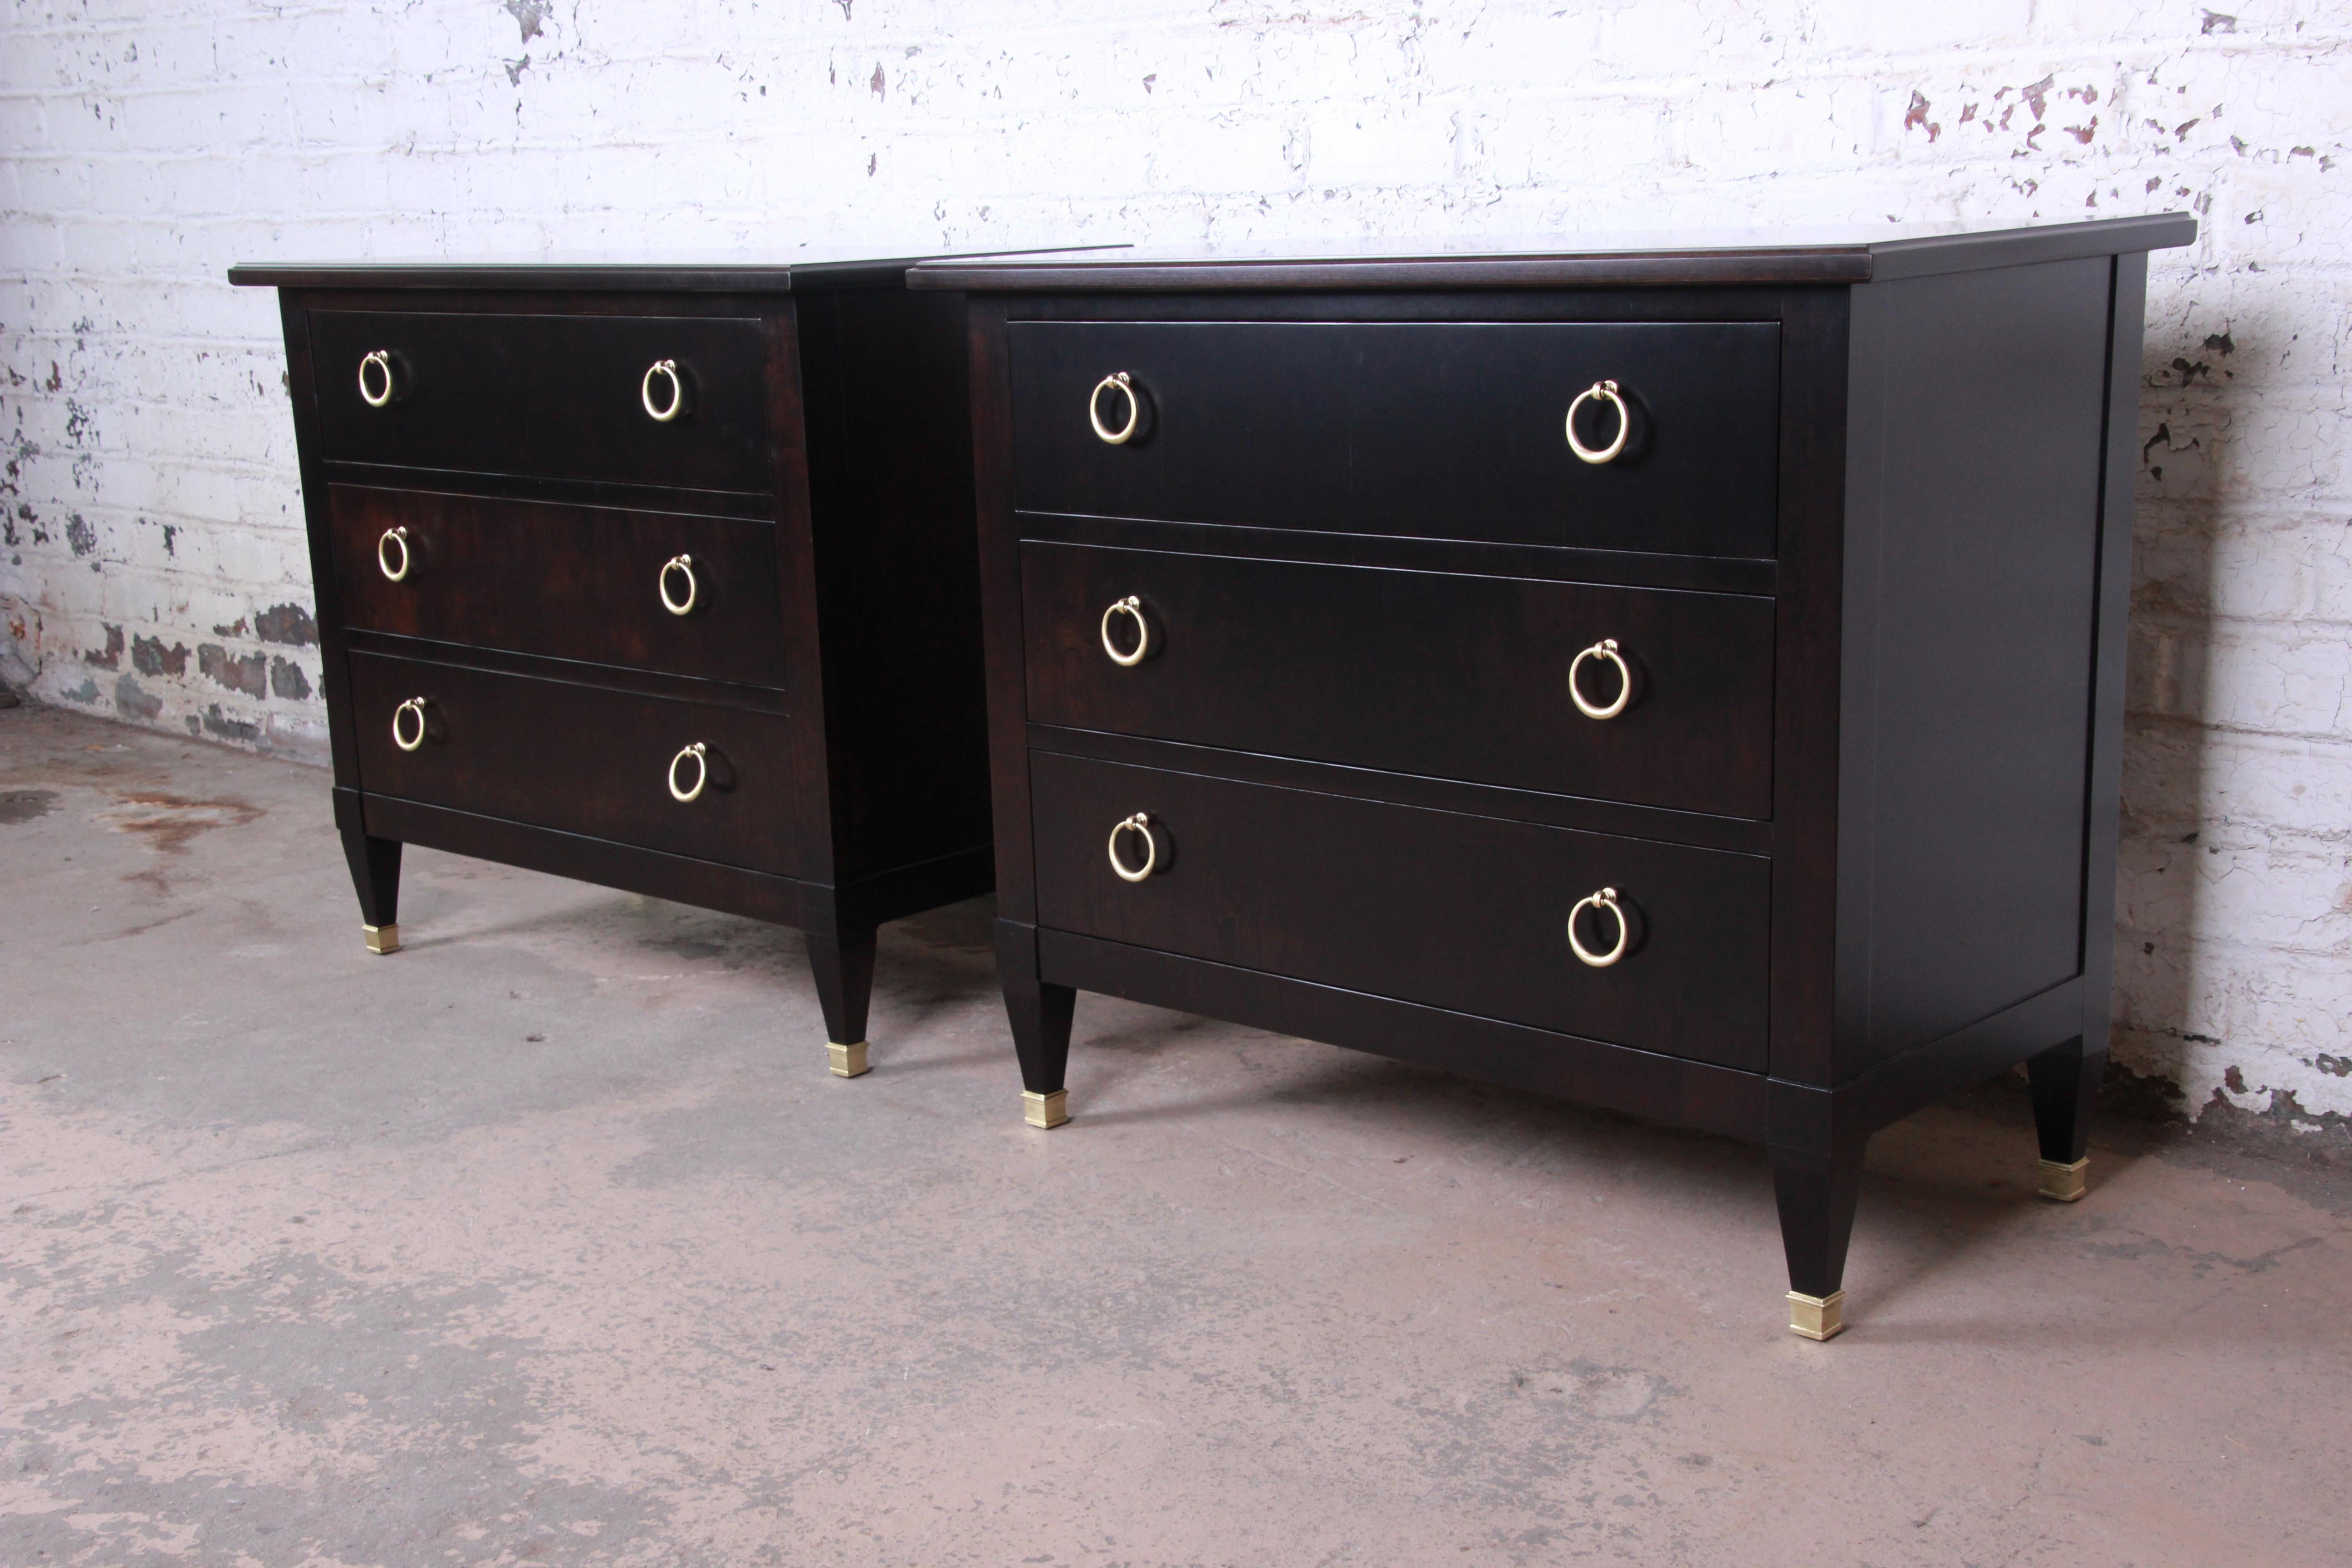 A gorgeous pair of Hollywood Regency large bedside tables or bachelor chests by Baker Furniture. The chests feature stunning walnut wood grain with a newly ebonized finish and original polished brass hardware and brass-tipped feet. They offer ample